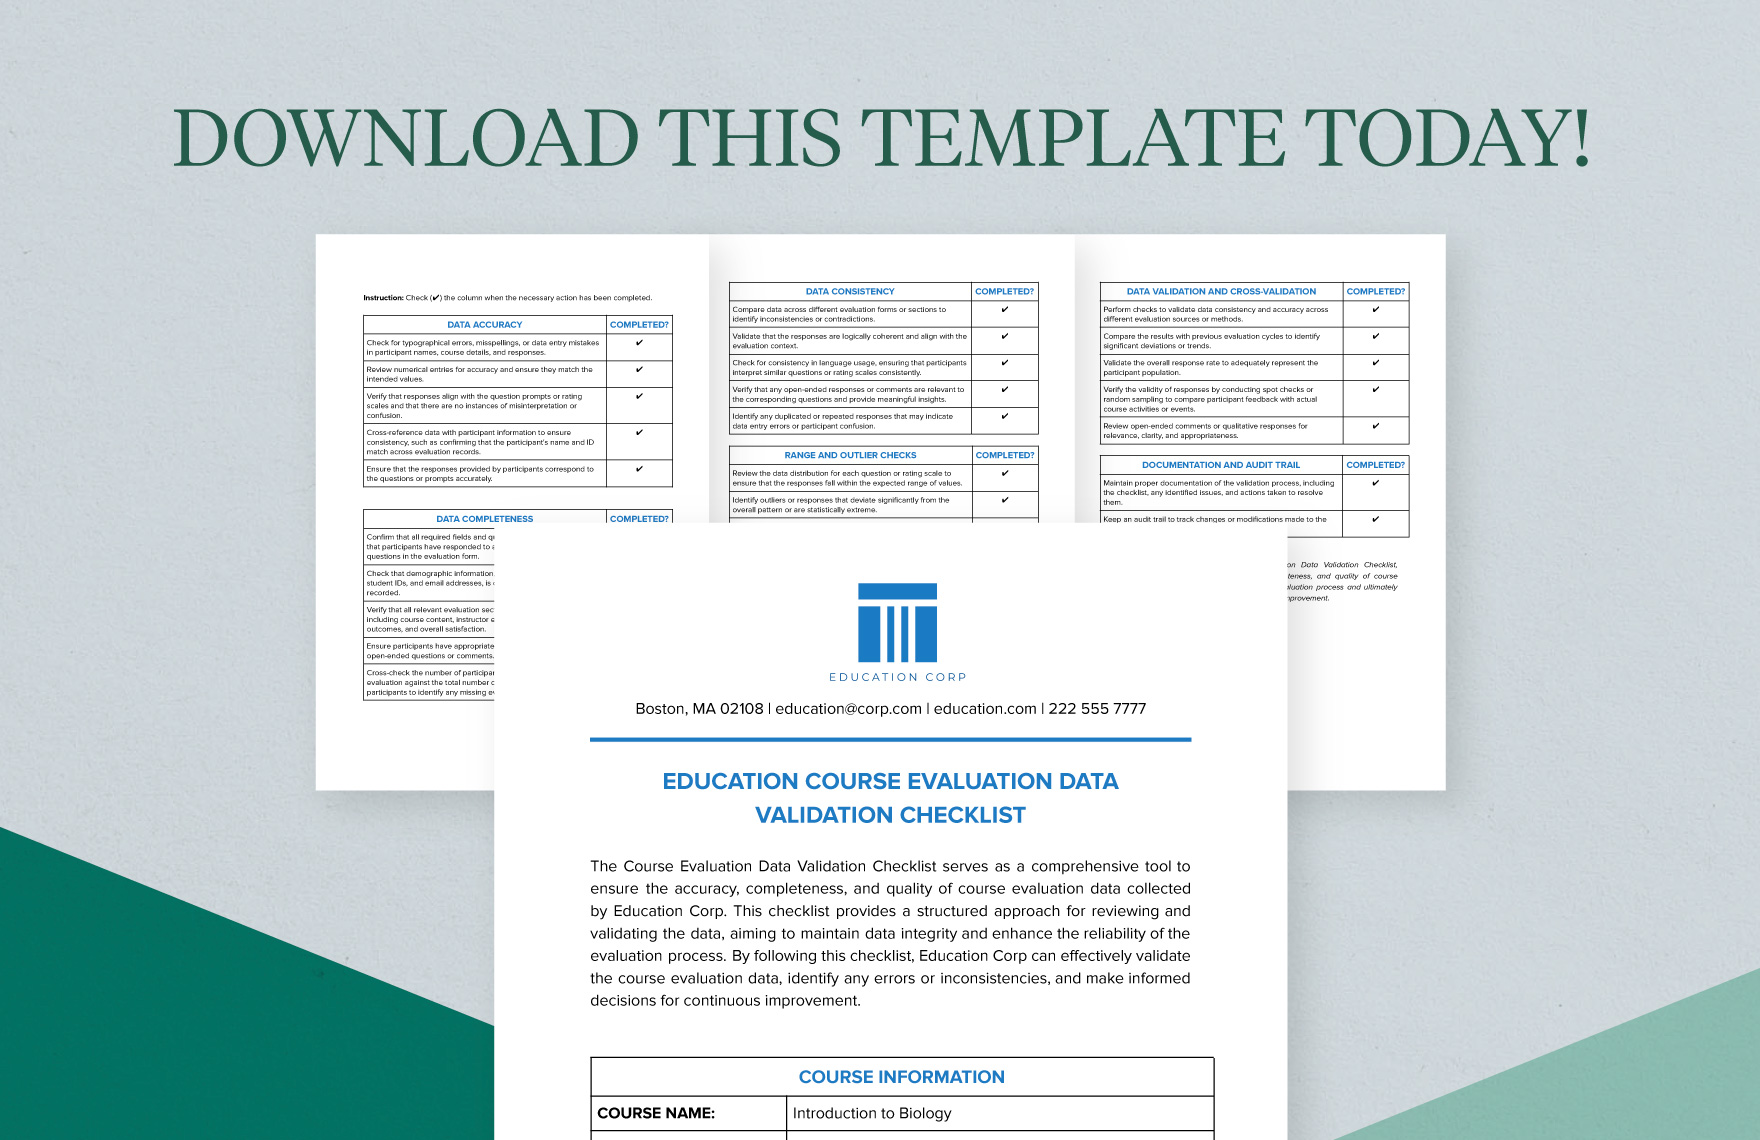 Education Course Evaluation Data Validation Checklist Template